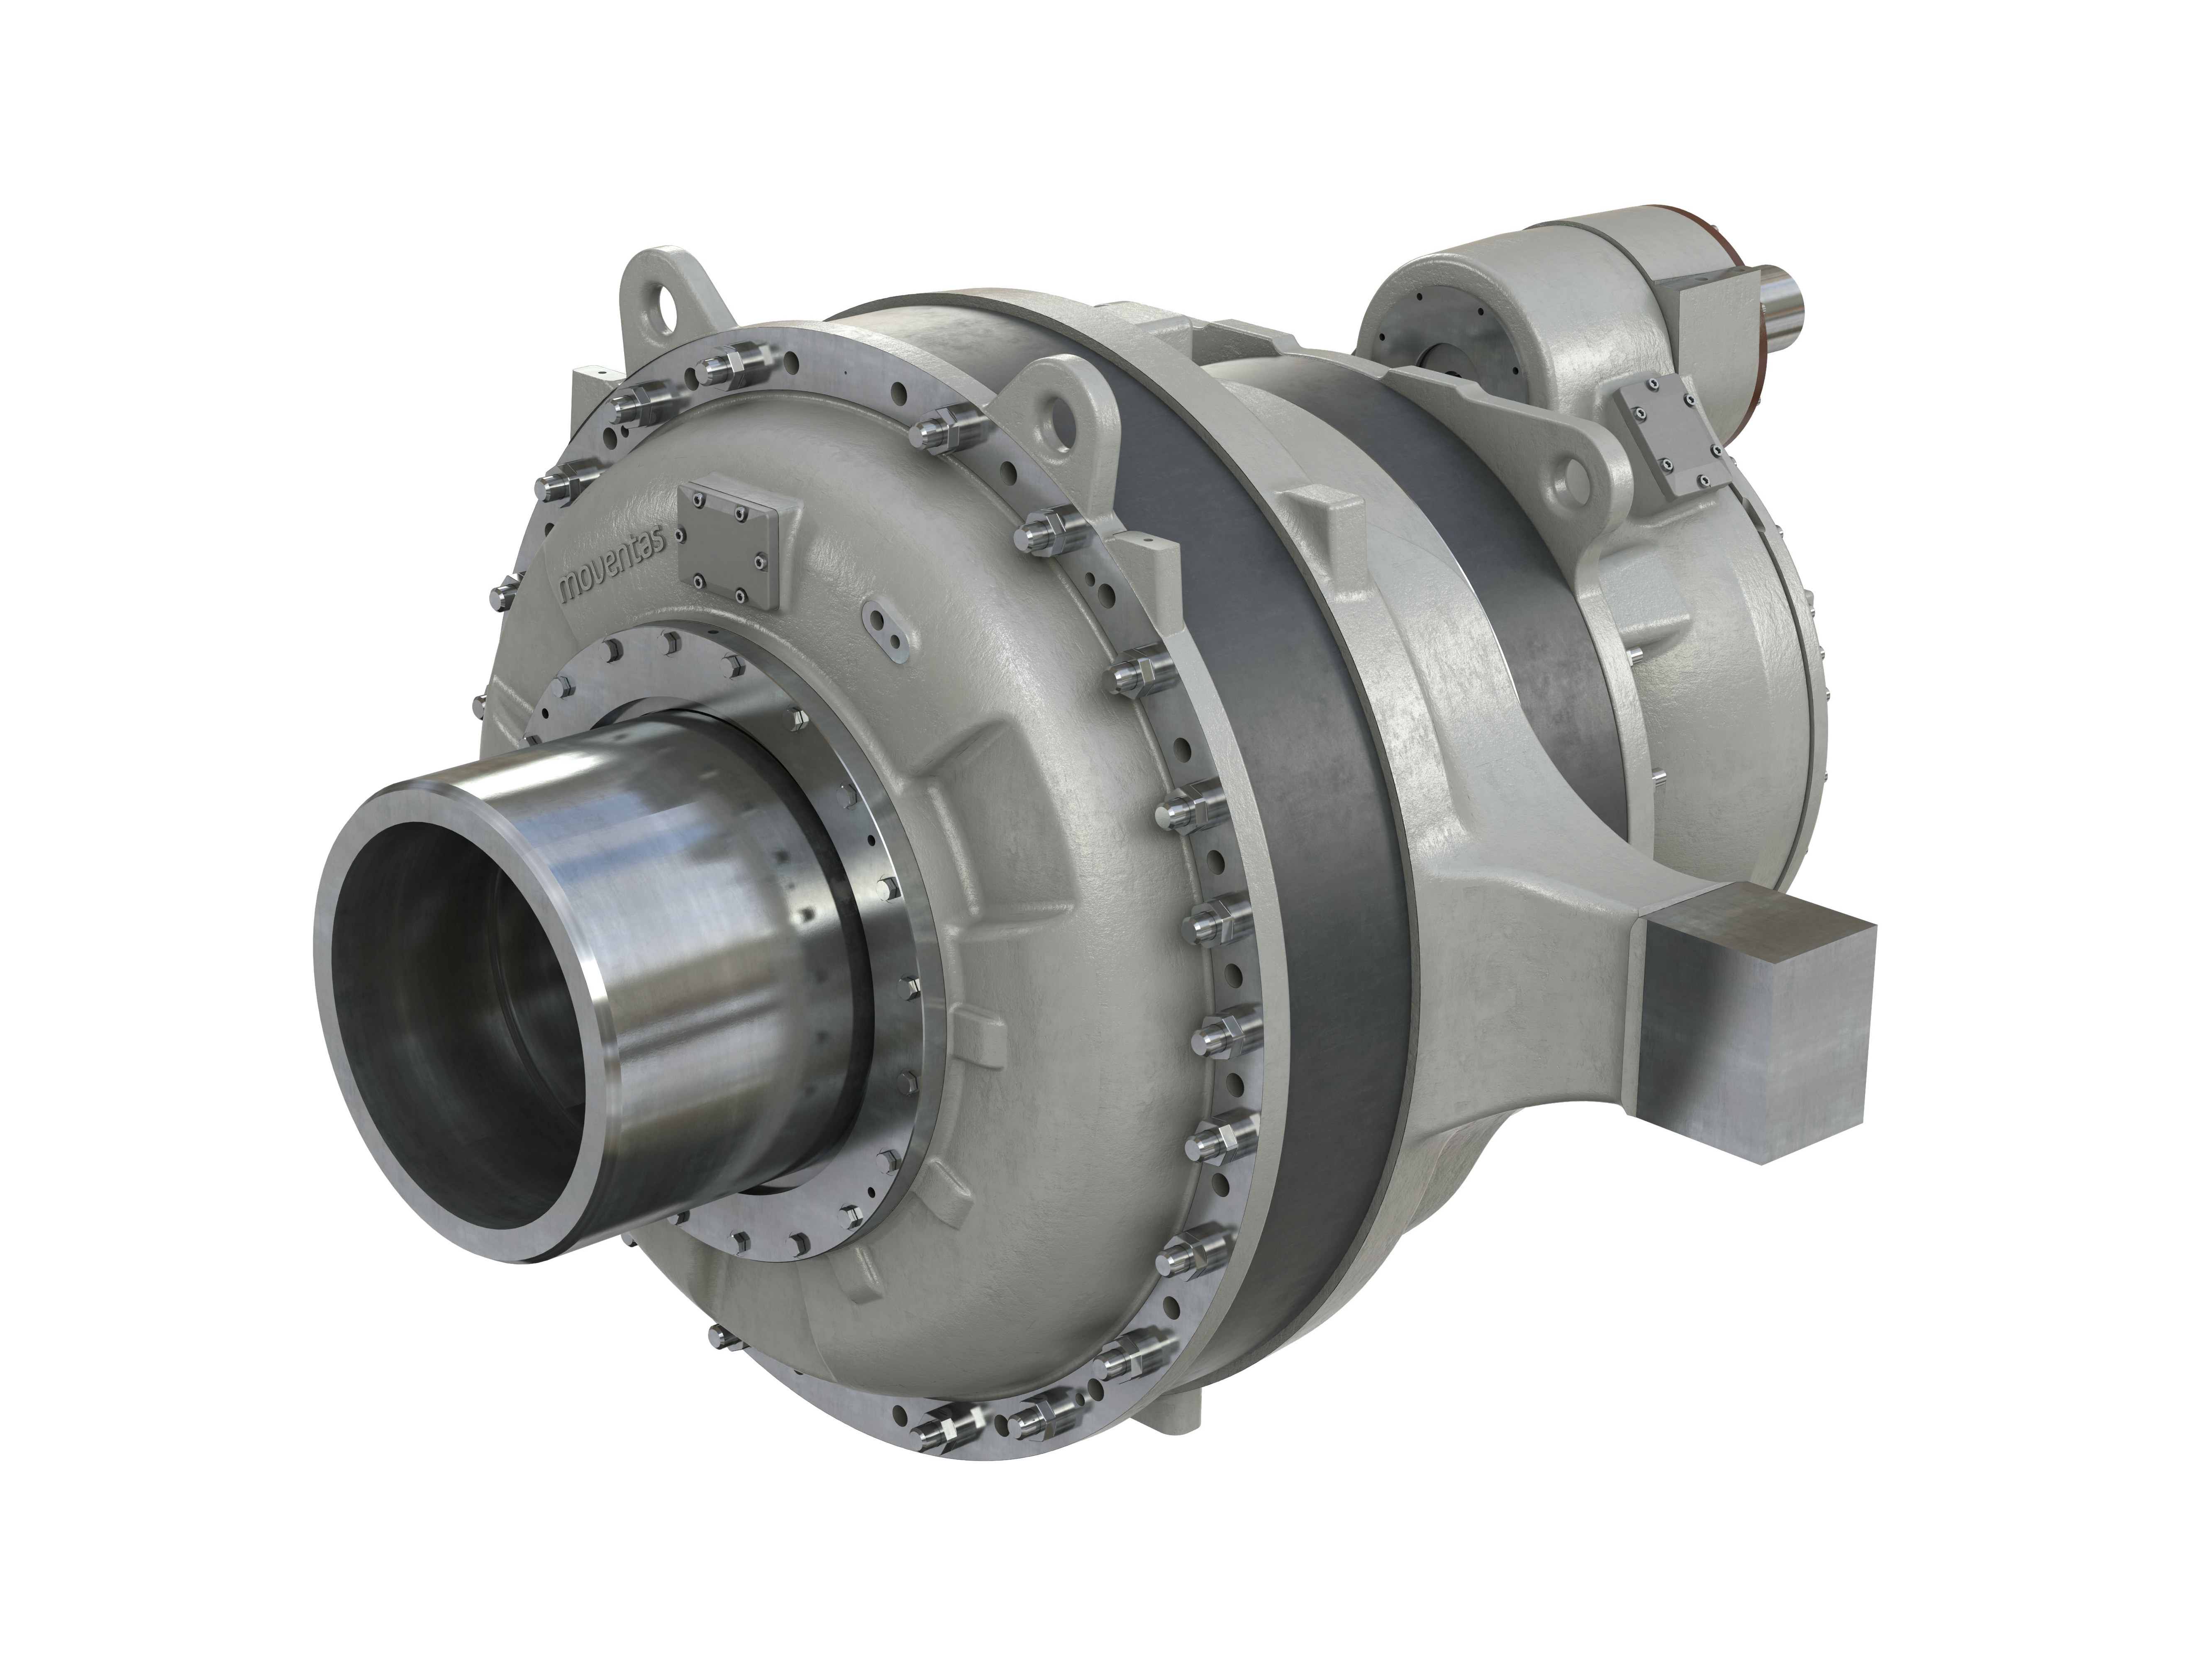 Moventas Launches New Exceed Series High Torque Density 3 MW Gearbox Platform